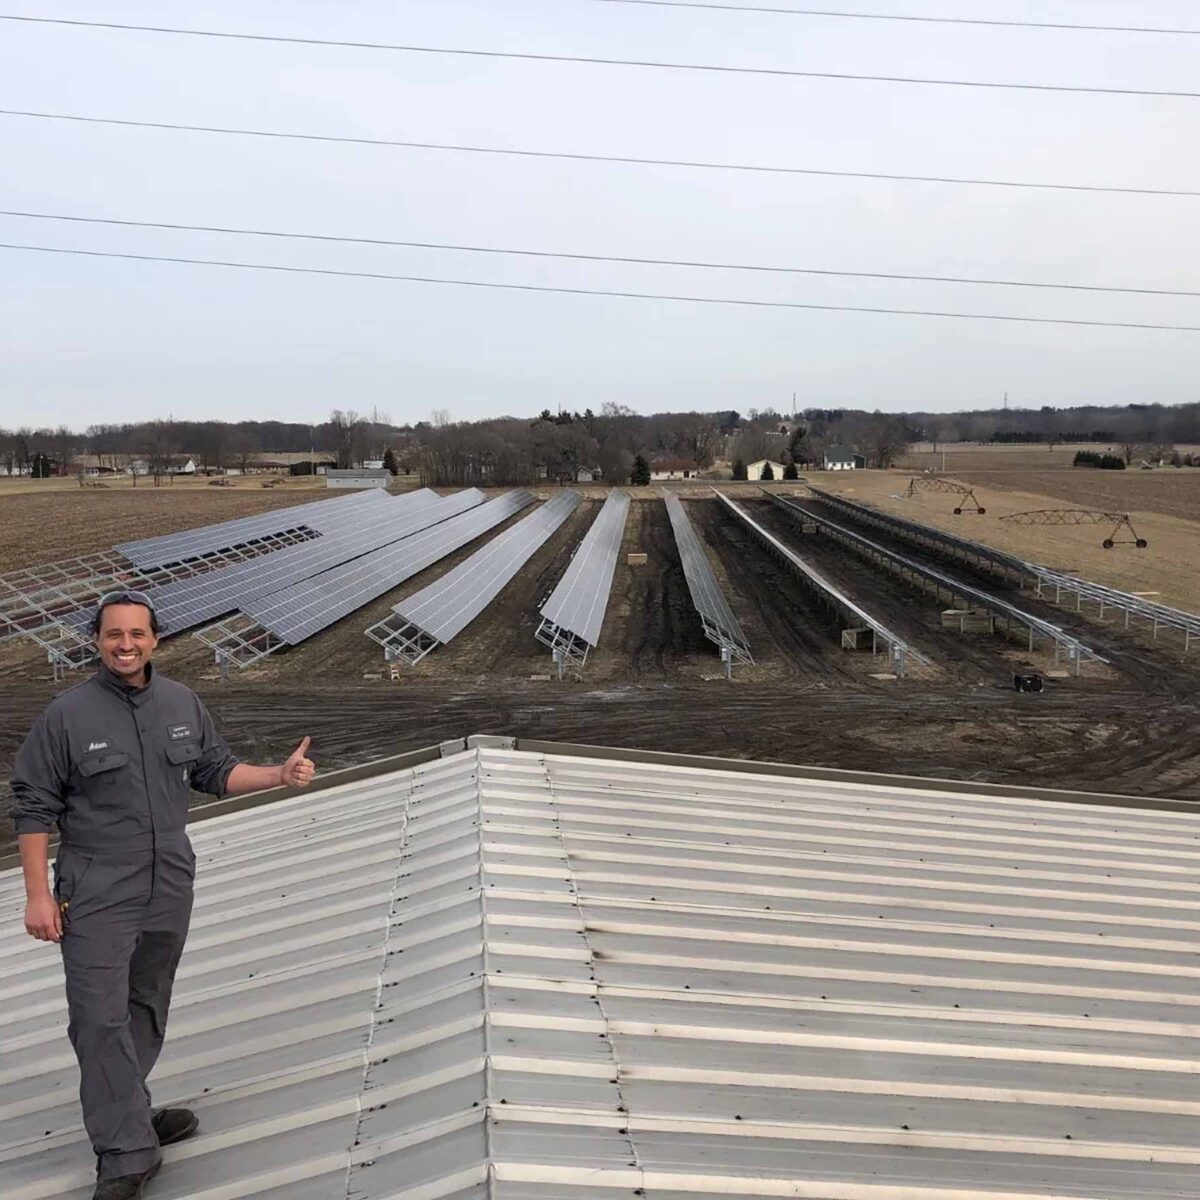 Man giving a thumbs up standing in front of many solar panels in a field.